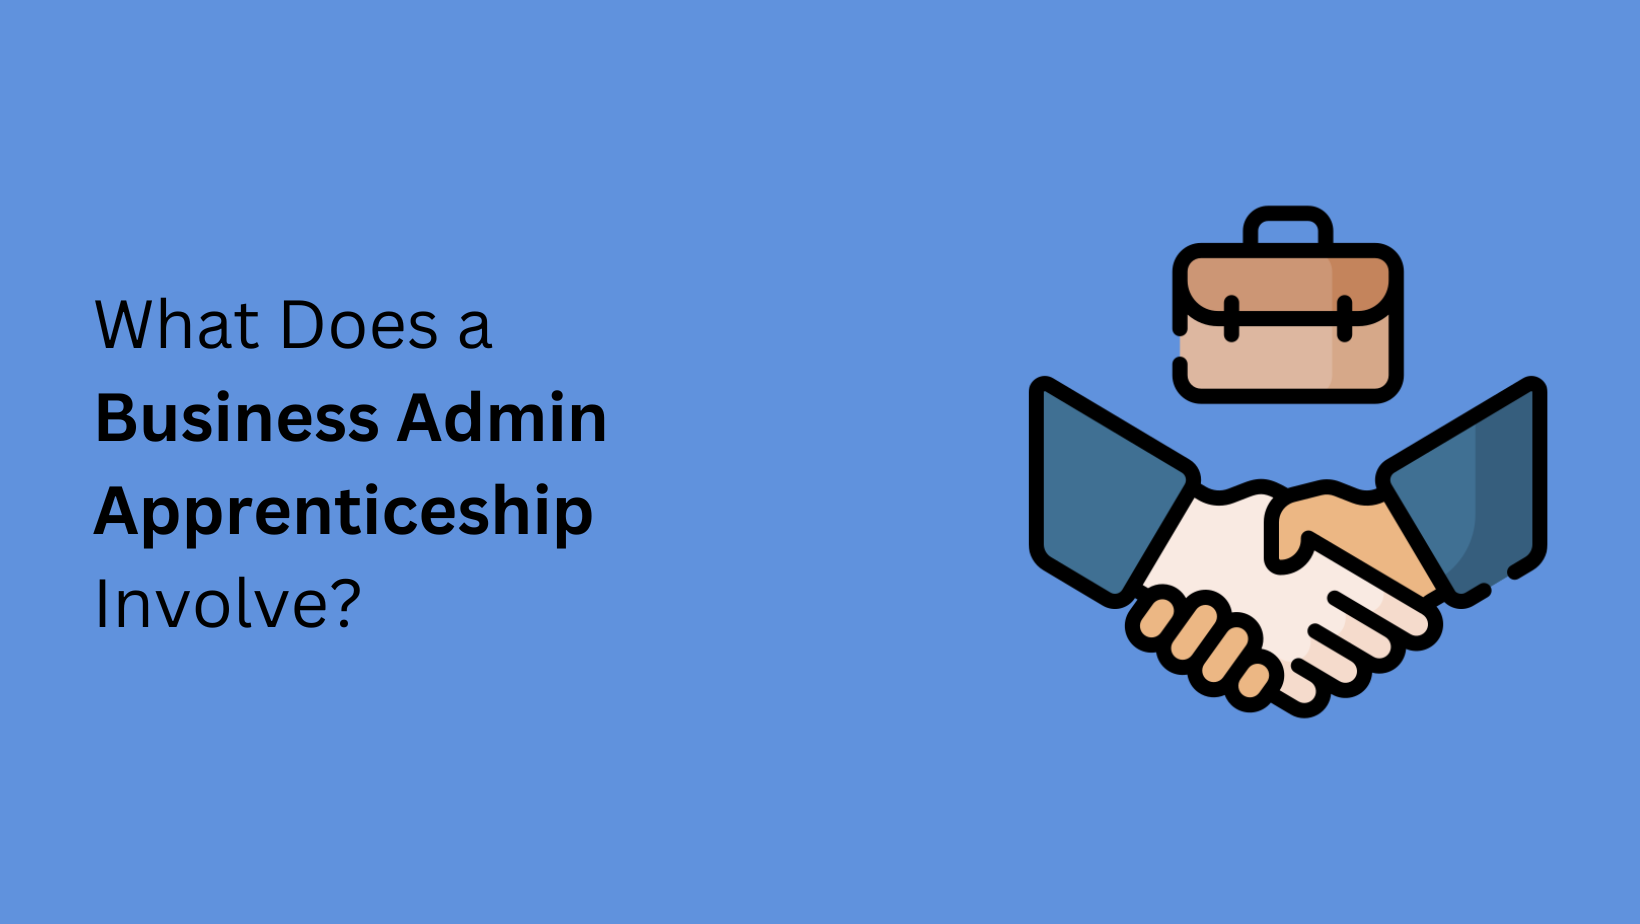 What Does a Business Admin Apprenticeship Involve